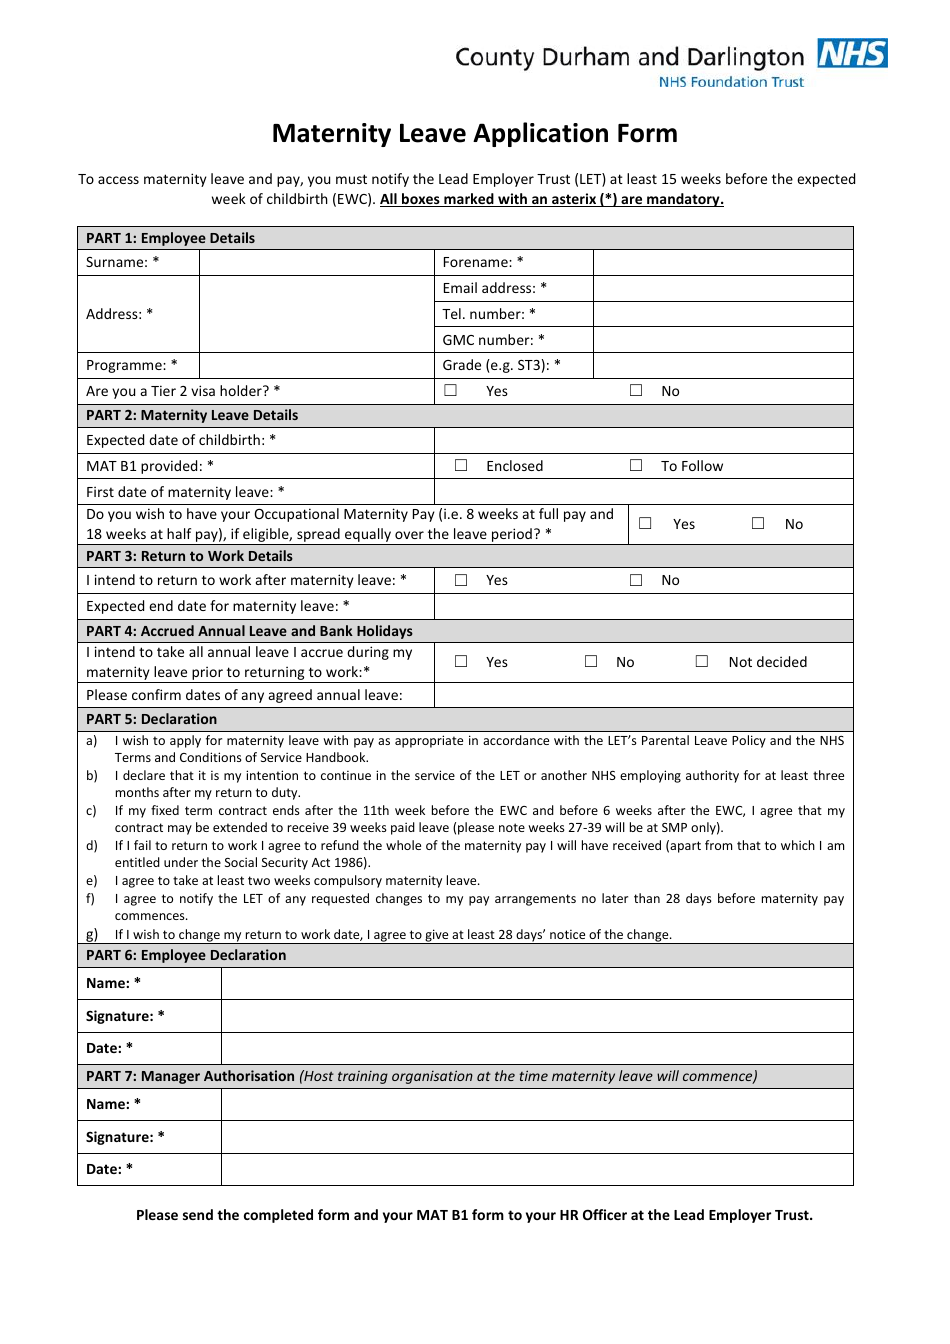 Maternity Leave Application Form - Nhs - County Durham and Darlington, United Kingdom, Page 1